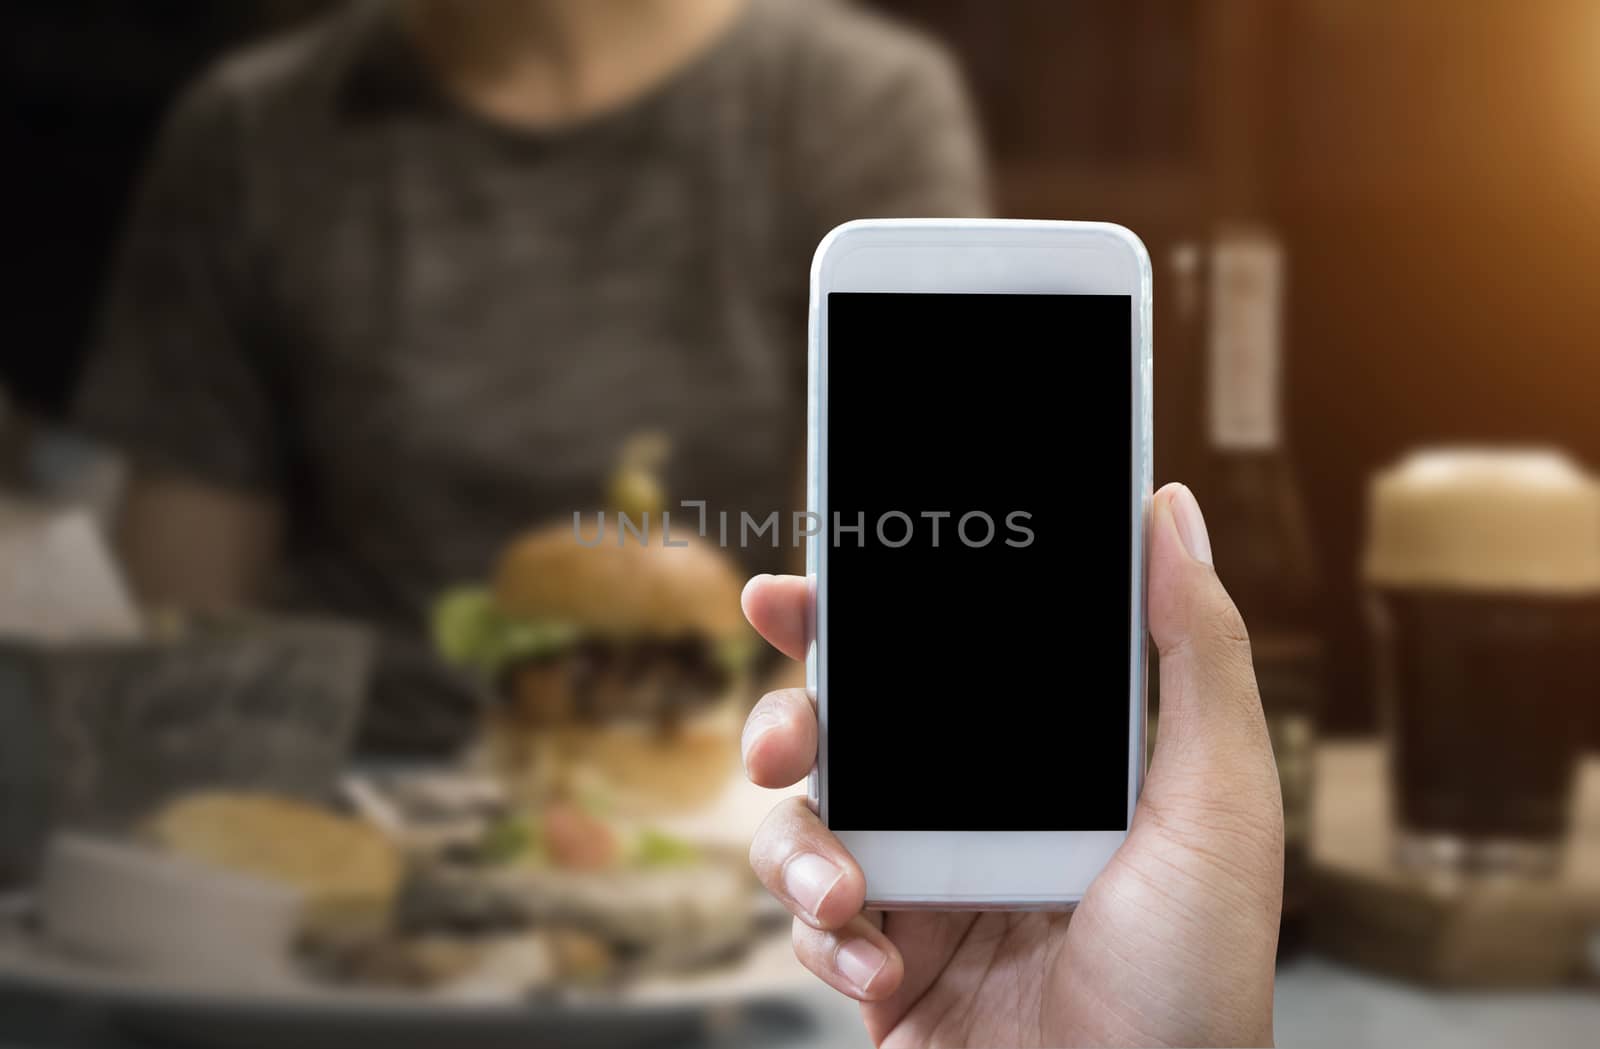 Man's hand shows mobile smartphone in vertical position and blurred background - smartphone mockup template